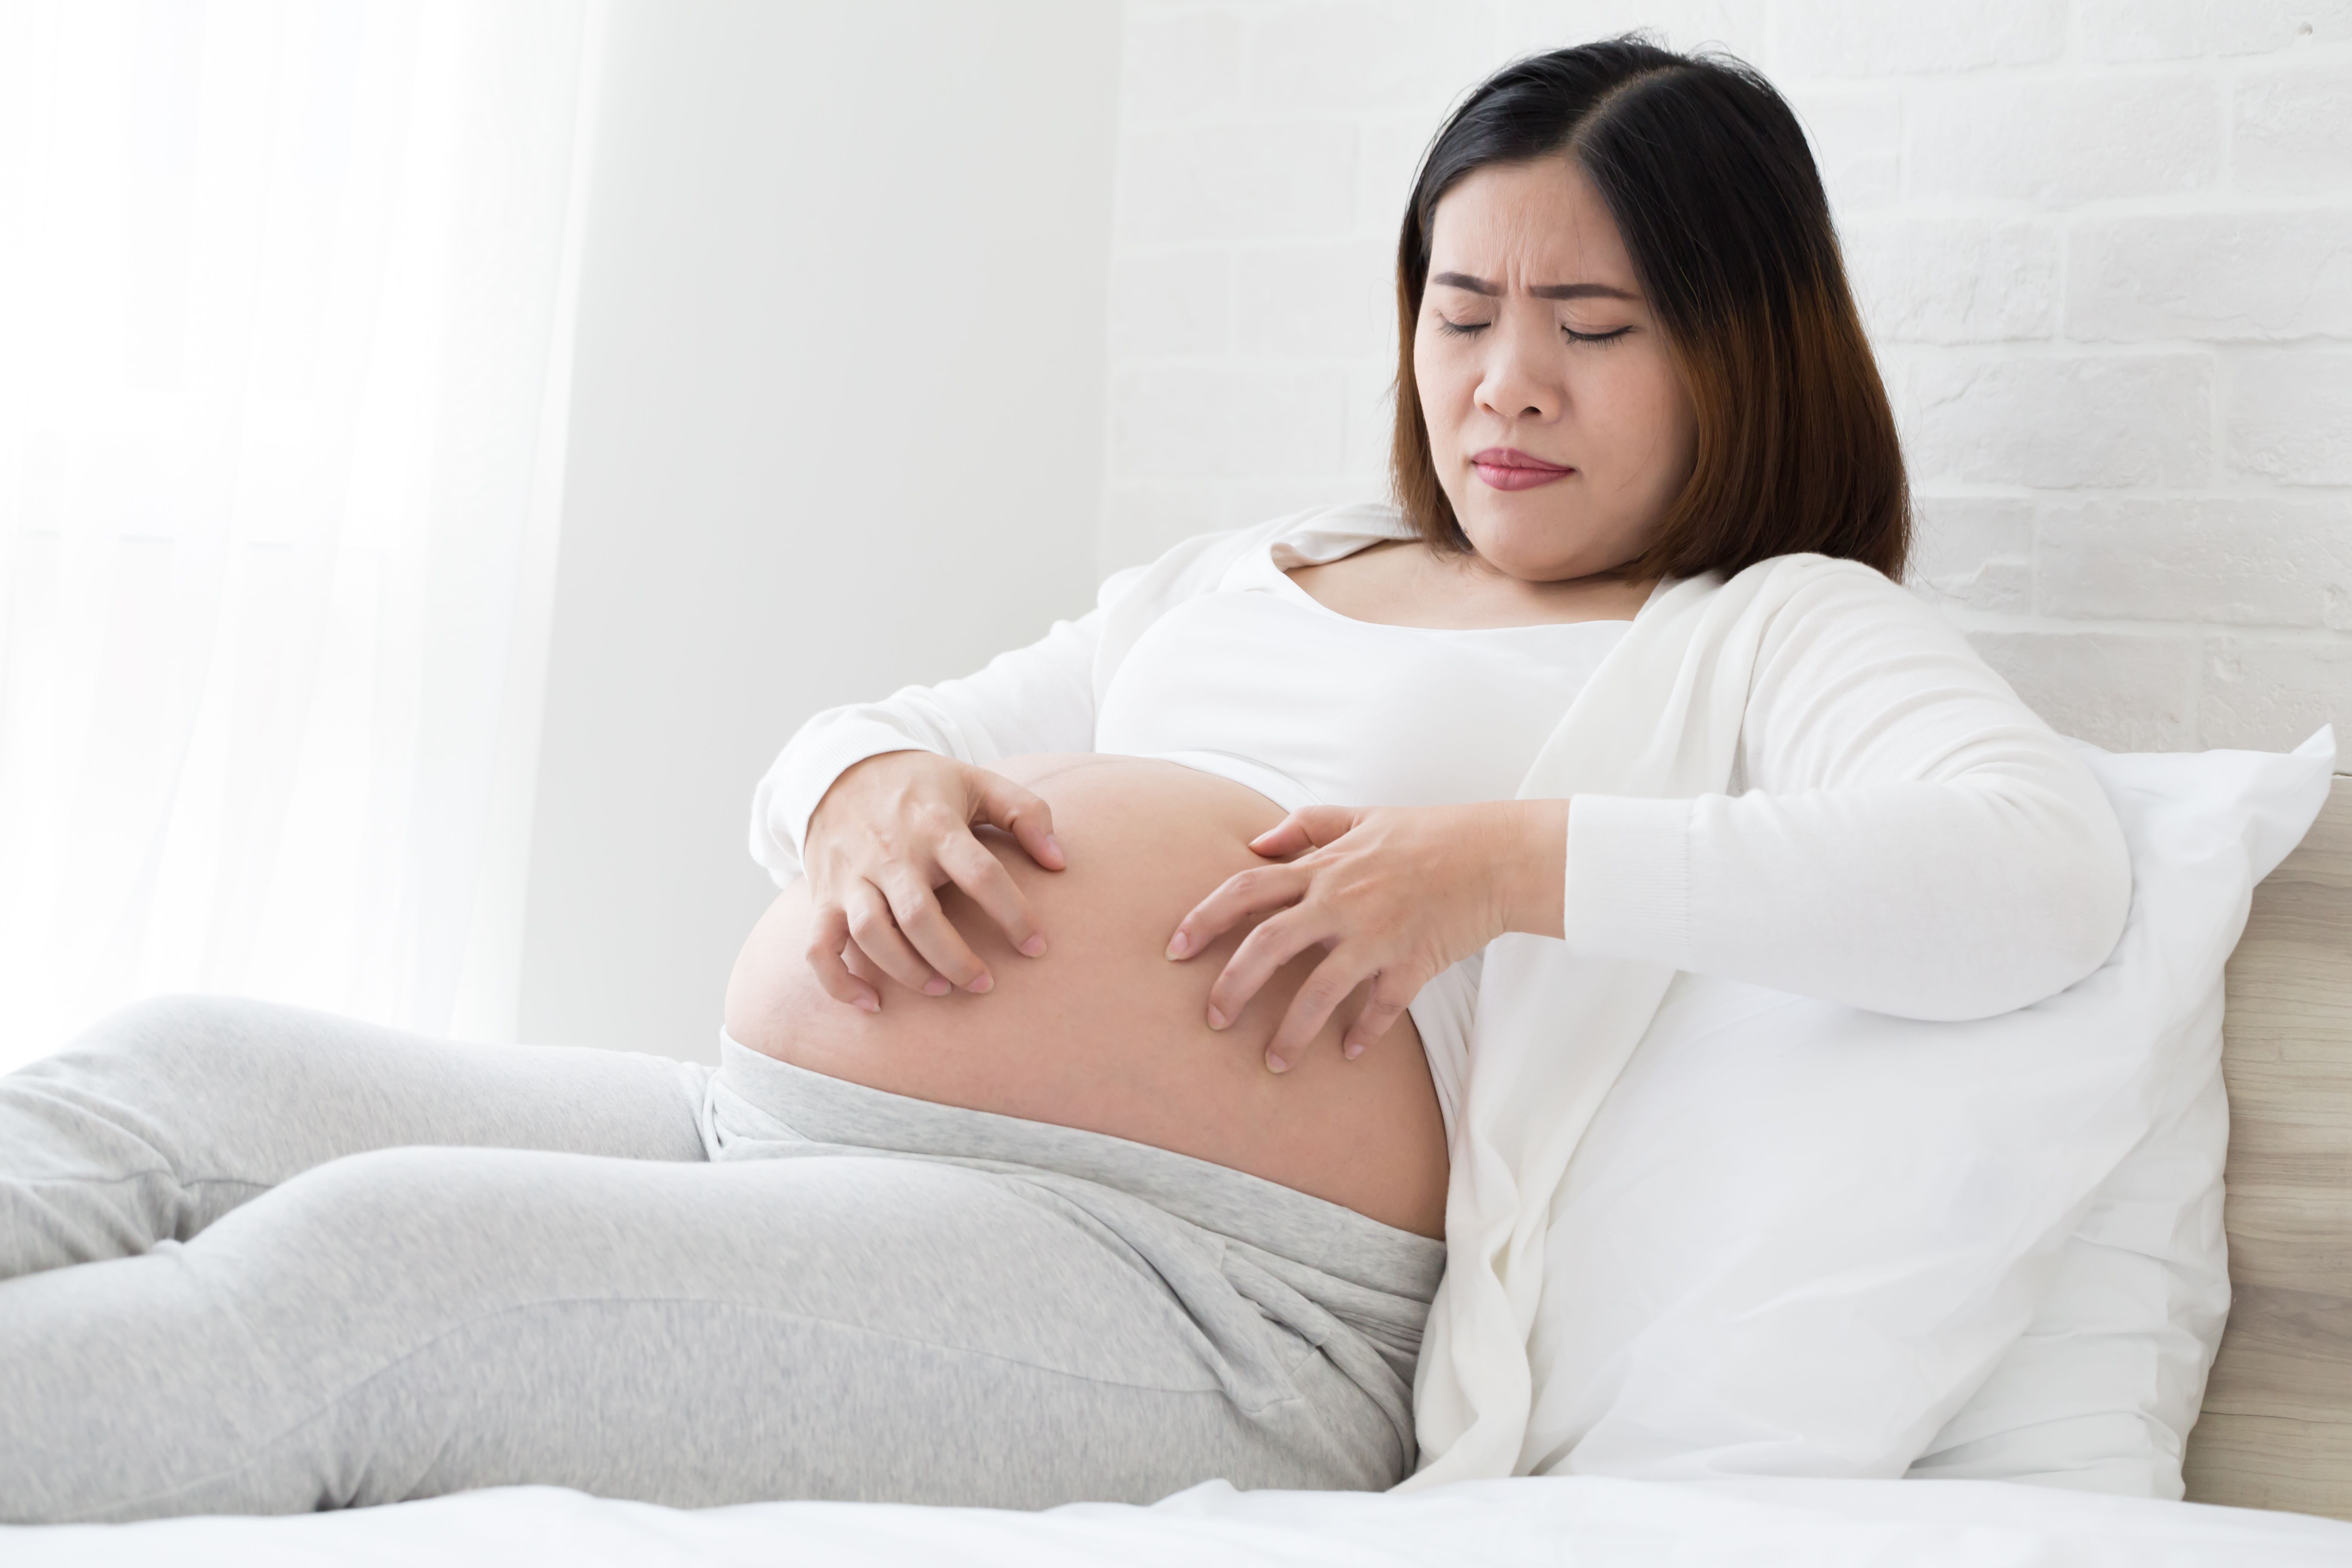 Researchers Investigate Psoriasis and Adverse Pregnancy Outcomes